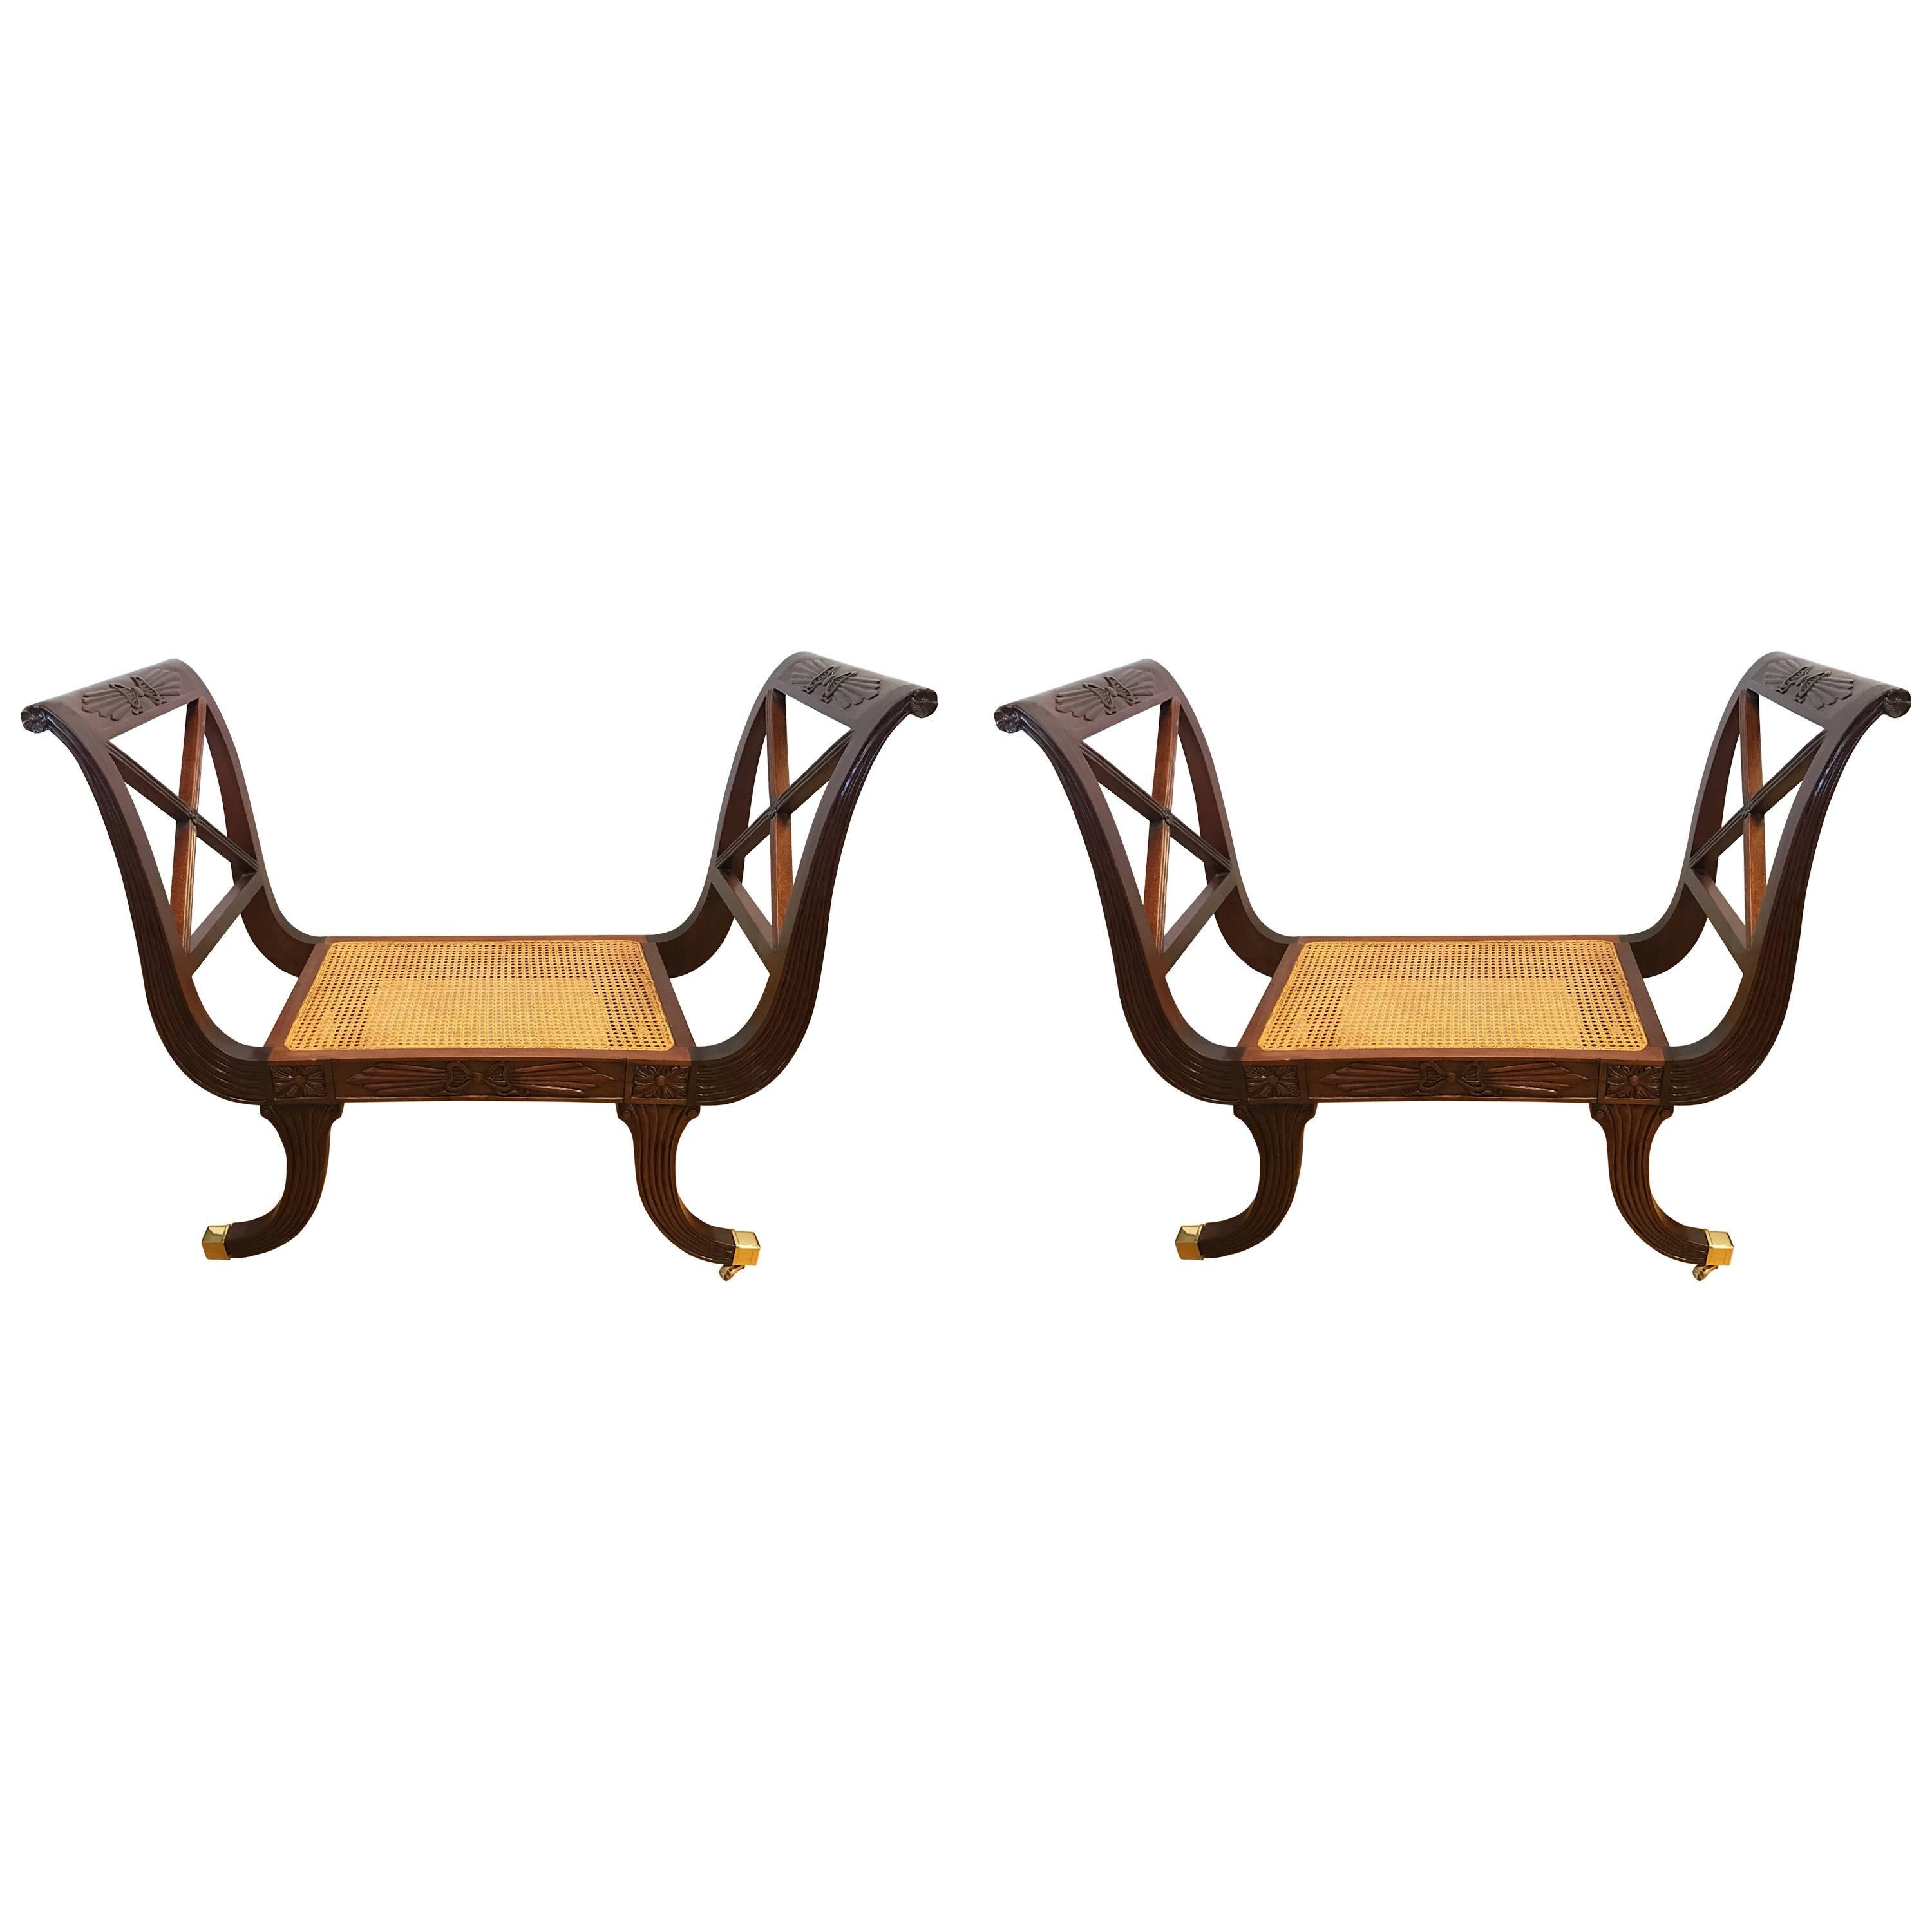 Pair of Neoclassical Carved Mahogany Settees Window Benches with Cane Seats